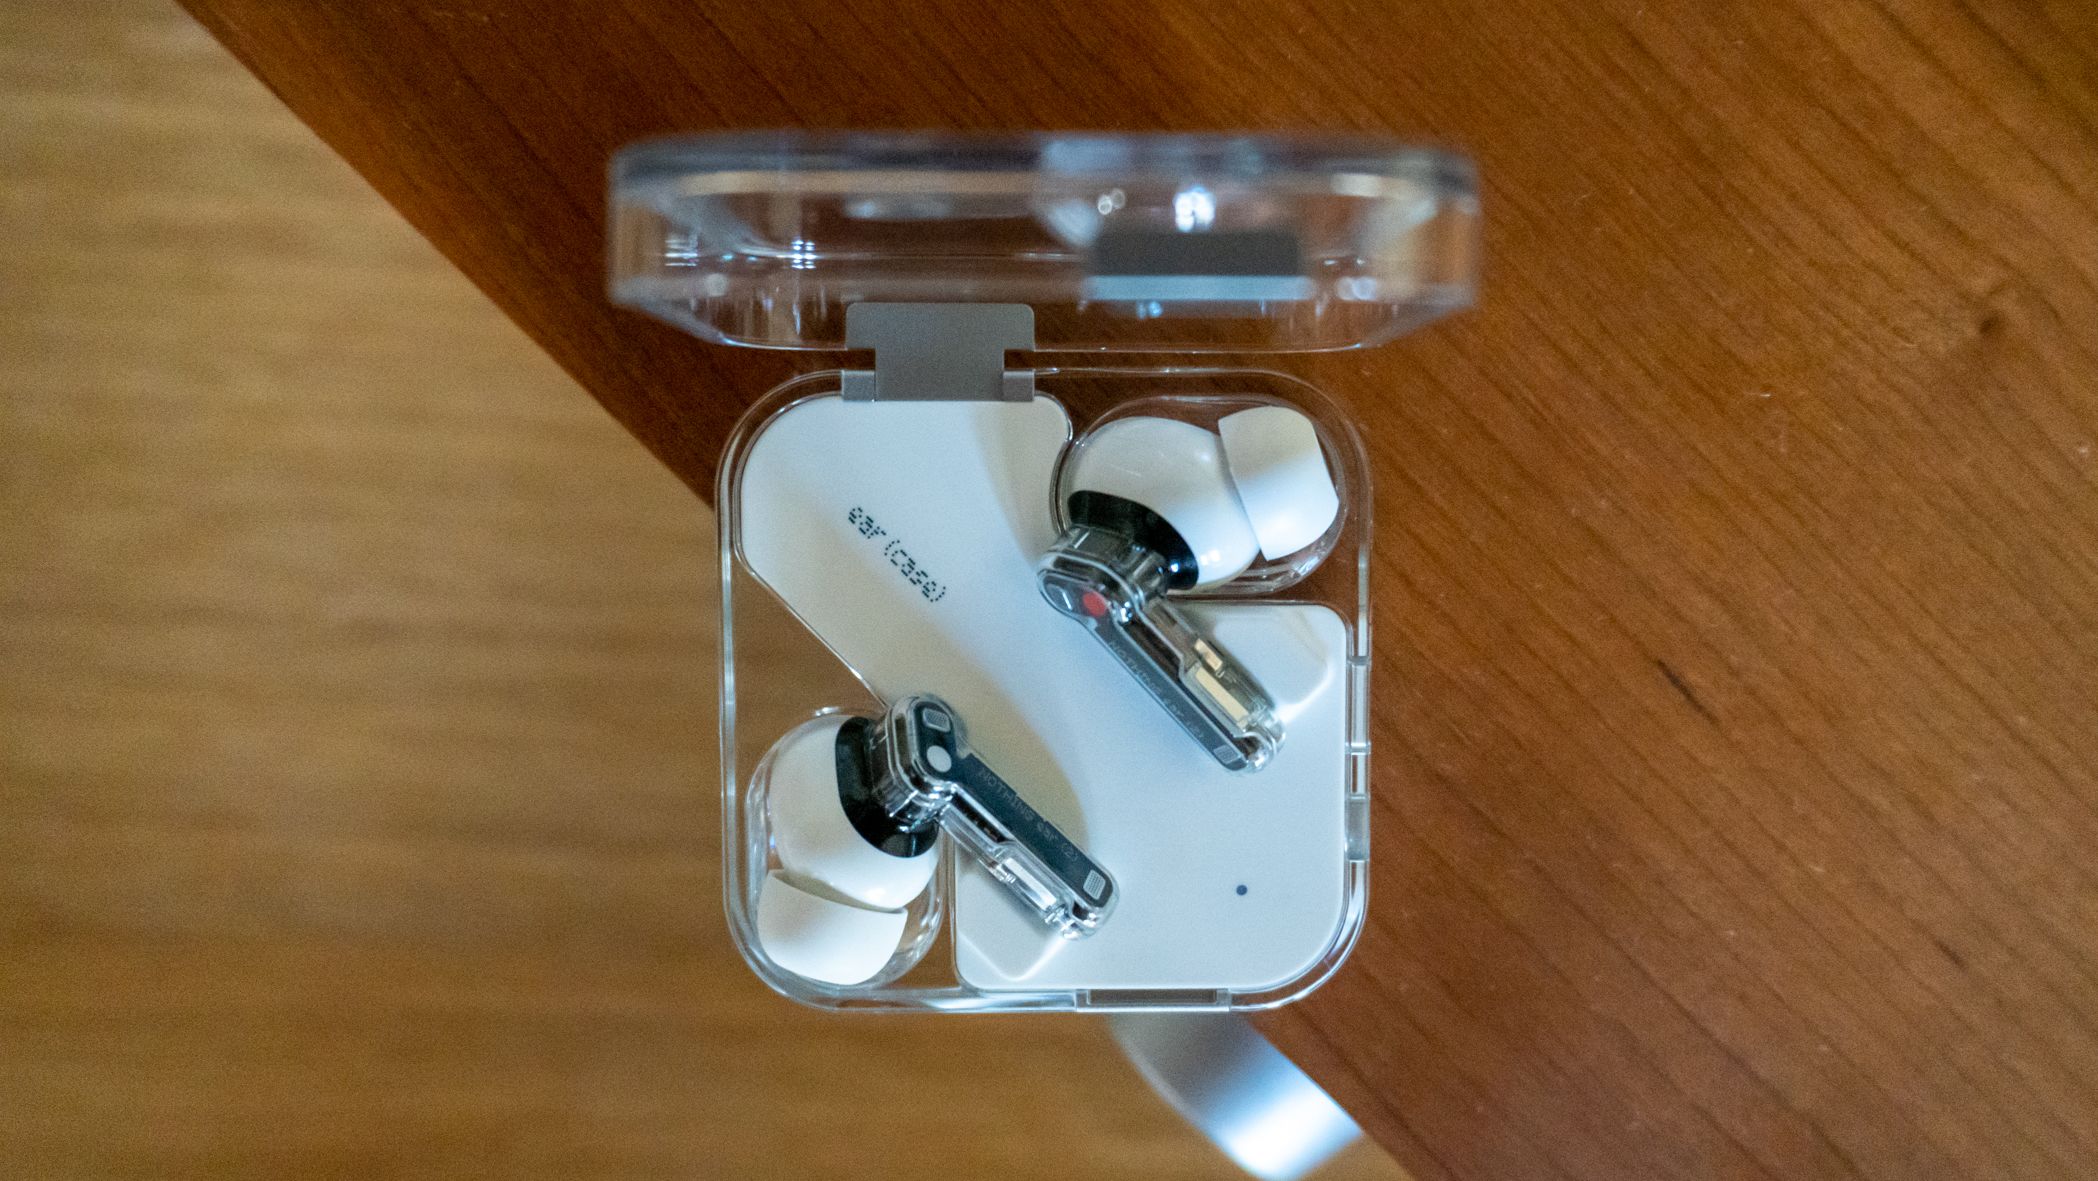 How Nothing Designed 'Ear 1s' to Beat Apple AirPods